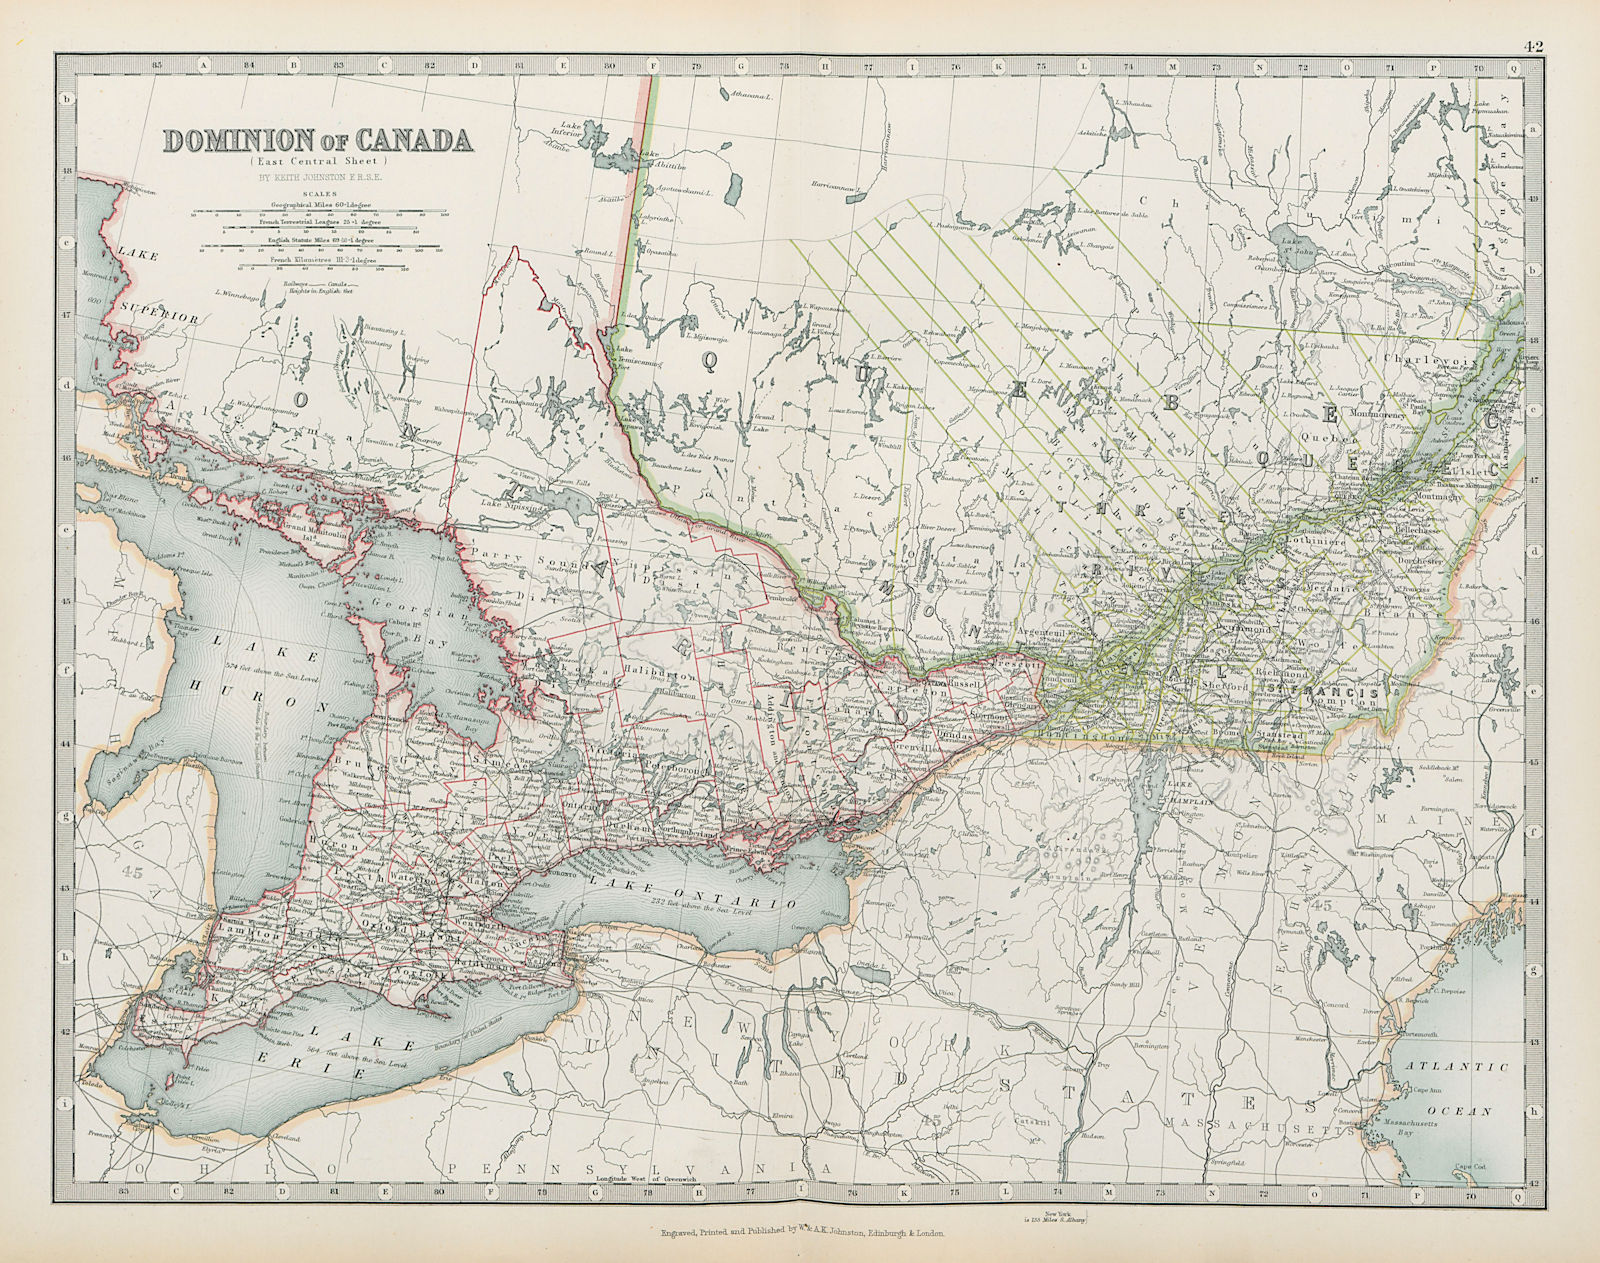 Associate Product DOMINION OF CANADA Ontario & Quebec showing counties JOHNSTON 1901 old map